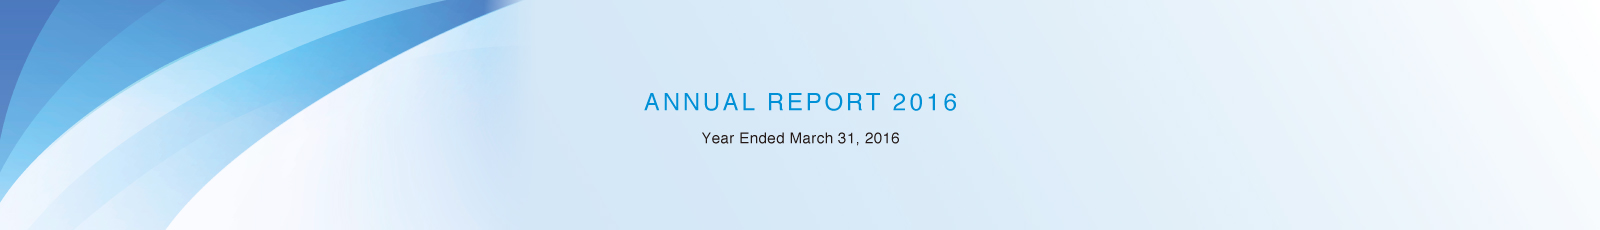 Annual Report 2016/Year ended March 31, 2016